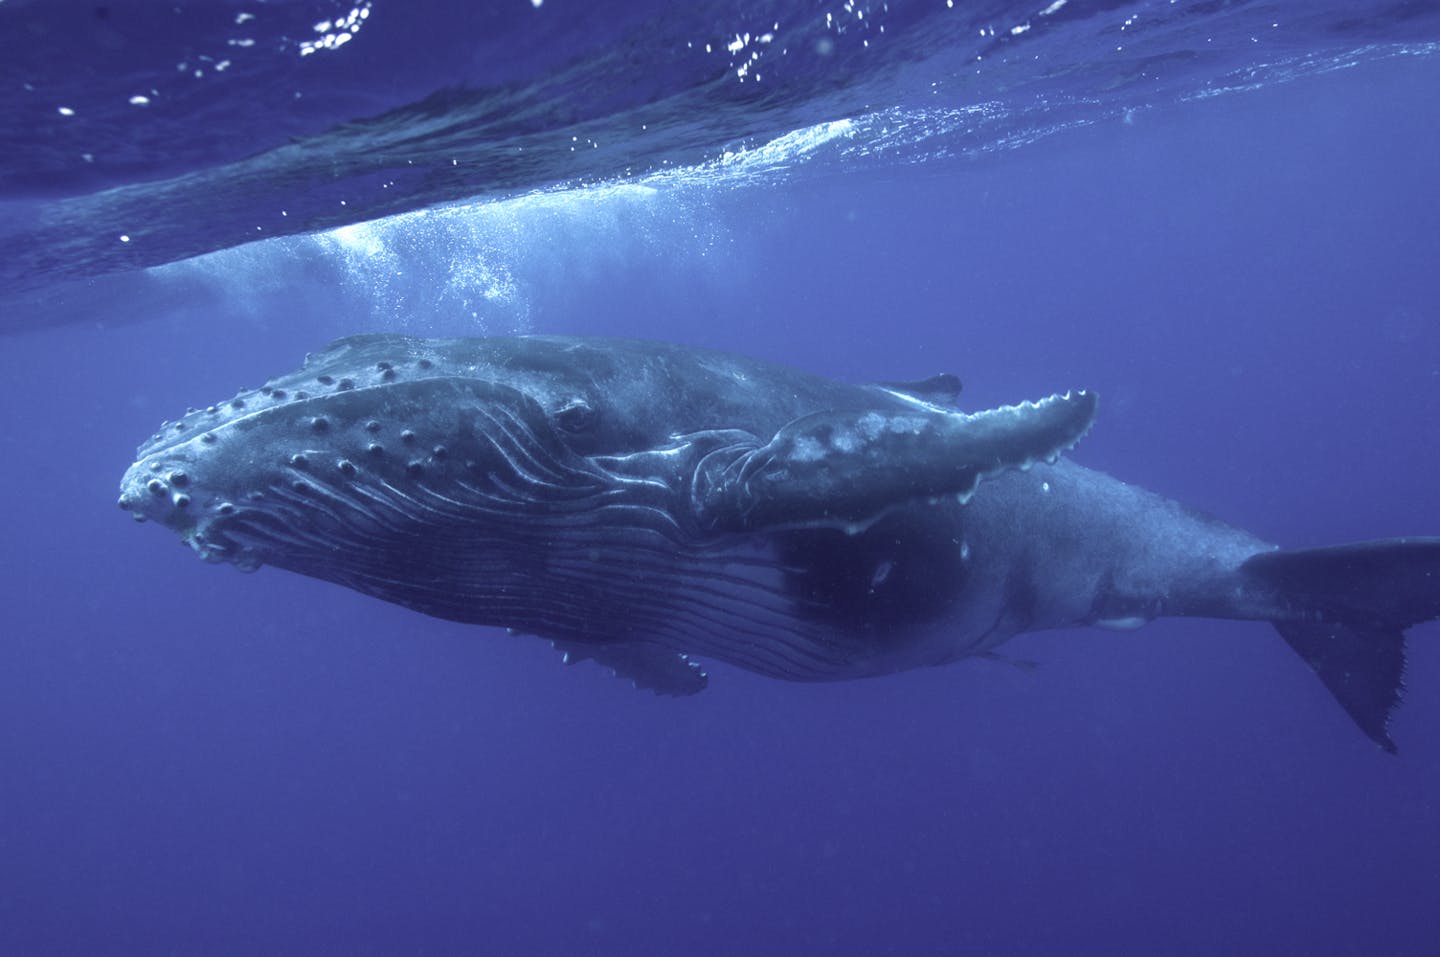 Whales provide a deep water solution to climate change